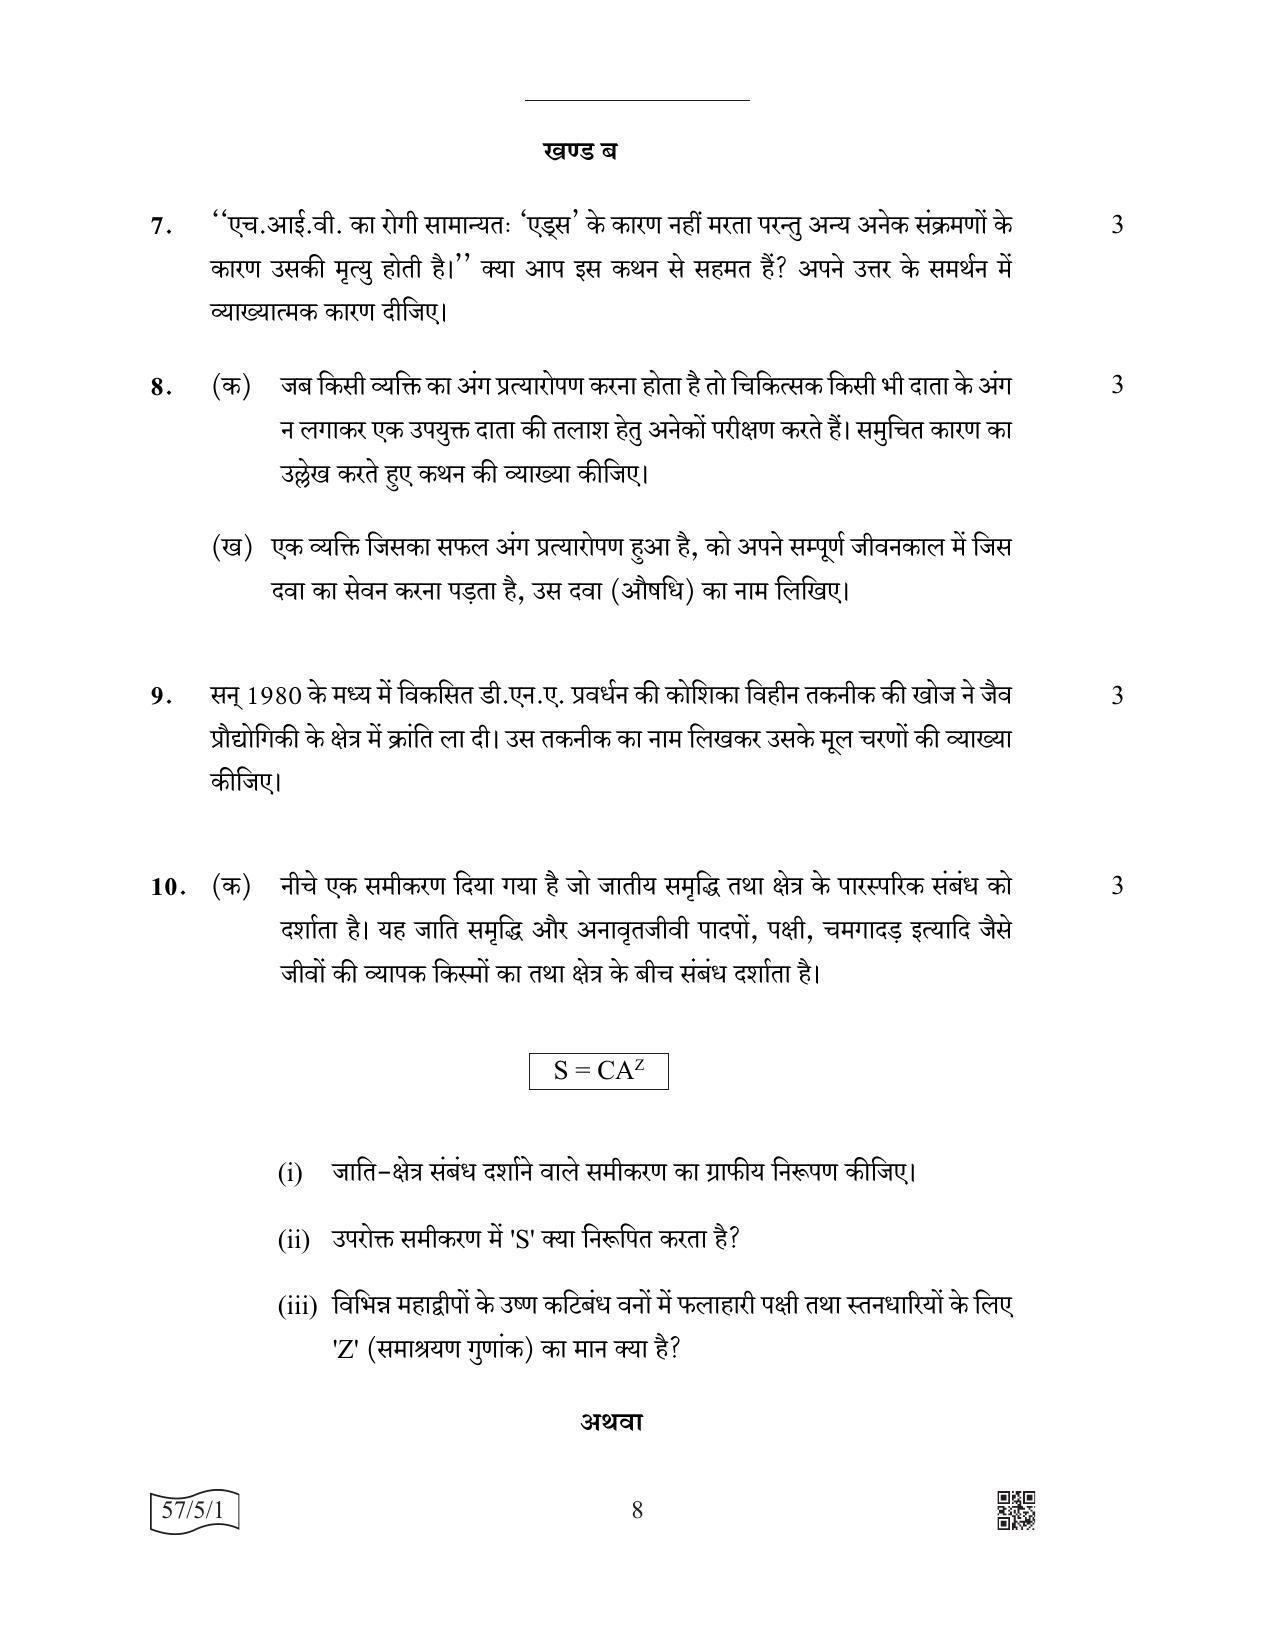 CBSE Class 12 57-5-1 Biology 2022 Question Paper - Page 8